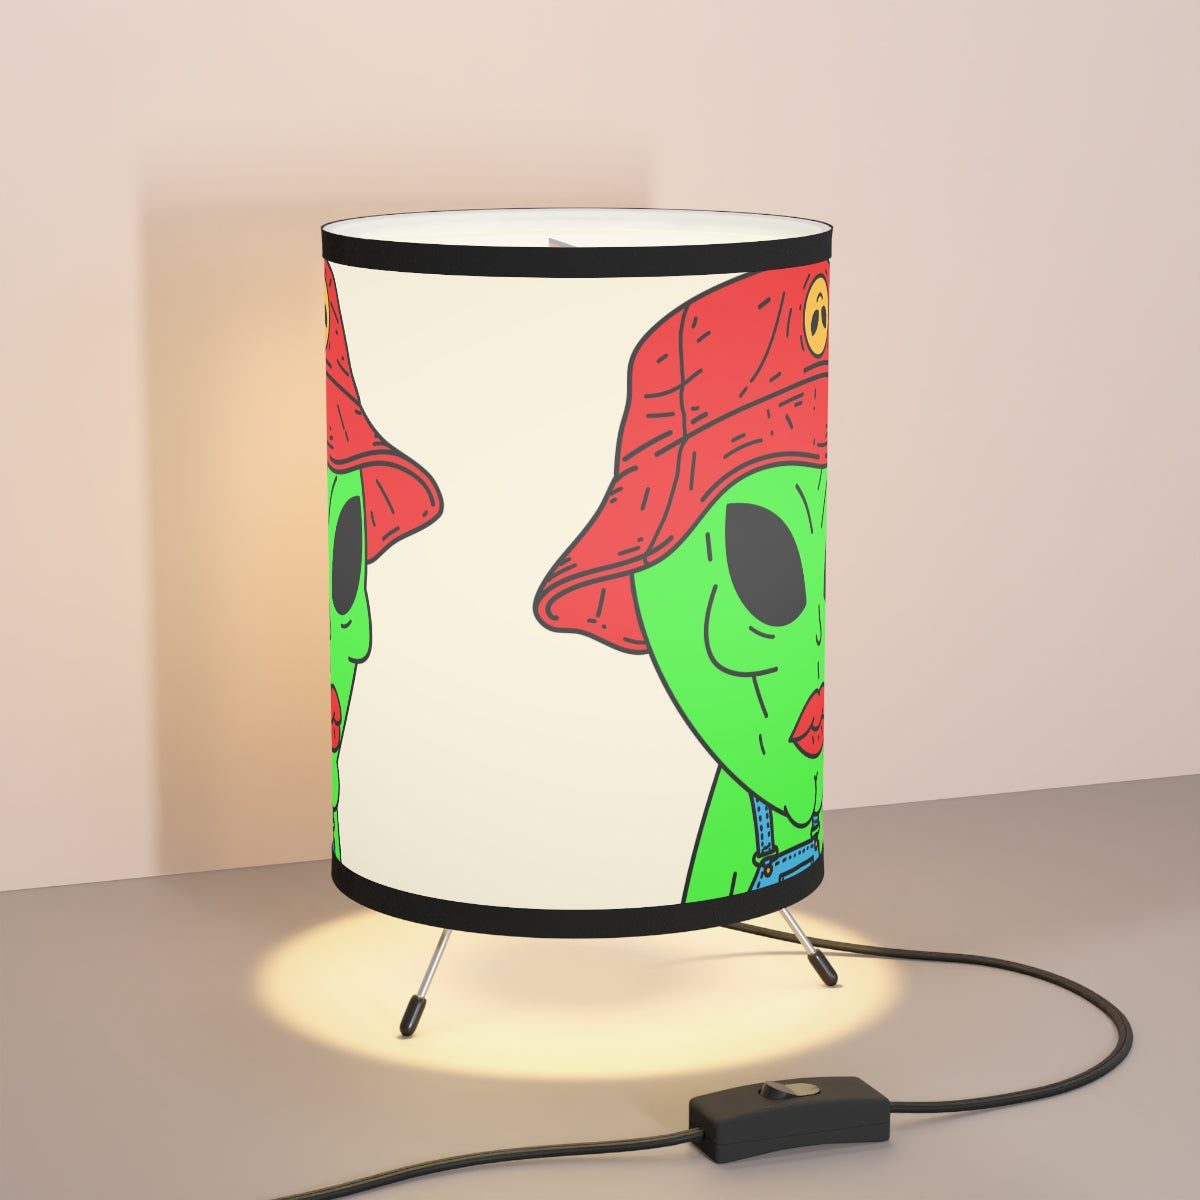 Space Visitor751 Structured Face Skeletal Alien Tripod Lamp with High-Res Printed Shade, US\CA plug